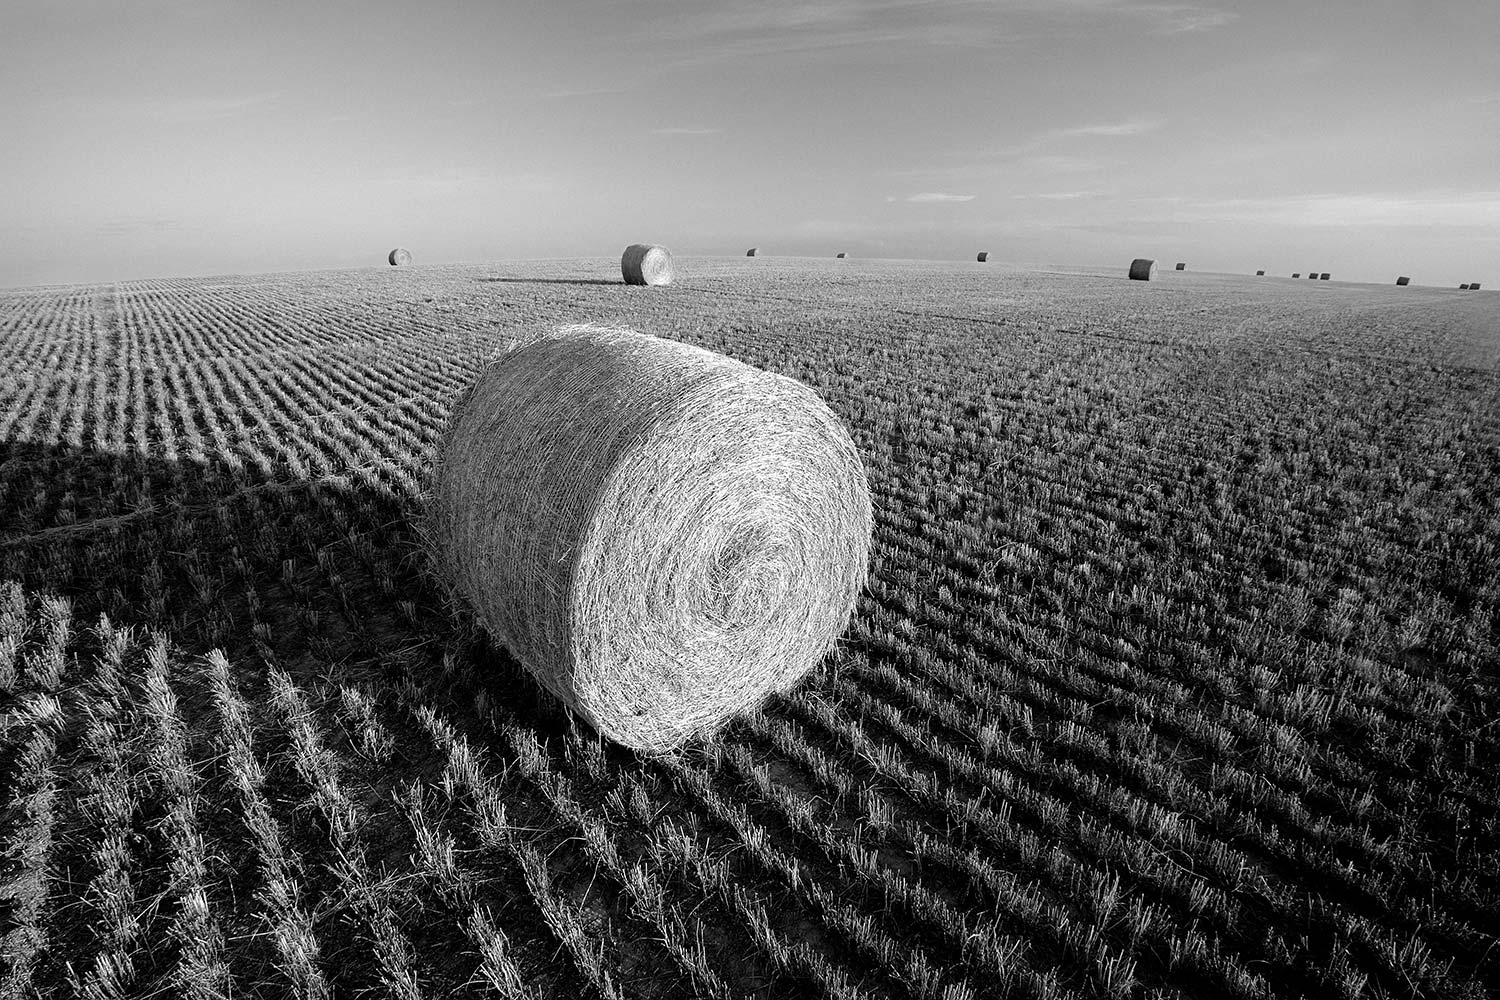 A field full of round bales of straw can be seen everywhere surrounded by wheat stubble and in the late afternoon light.&nbsp;→ Buy a Print